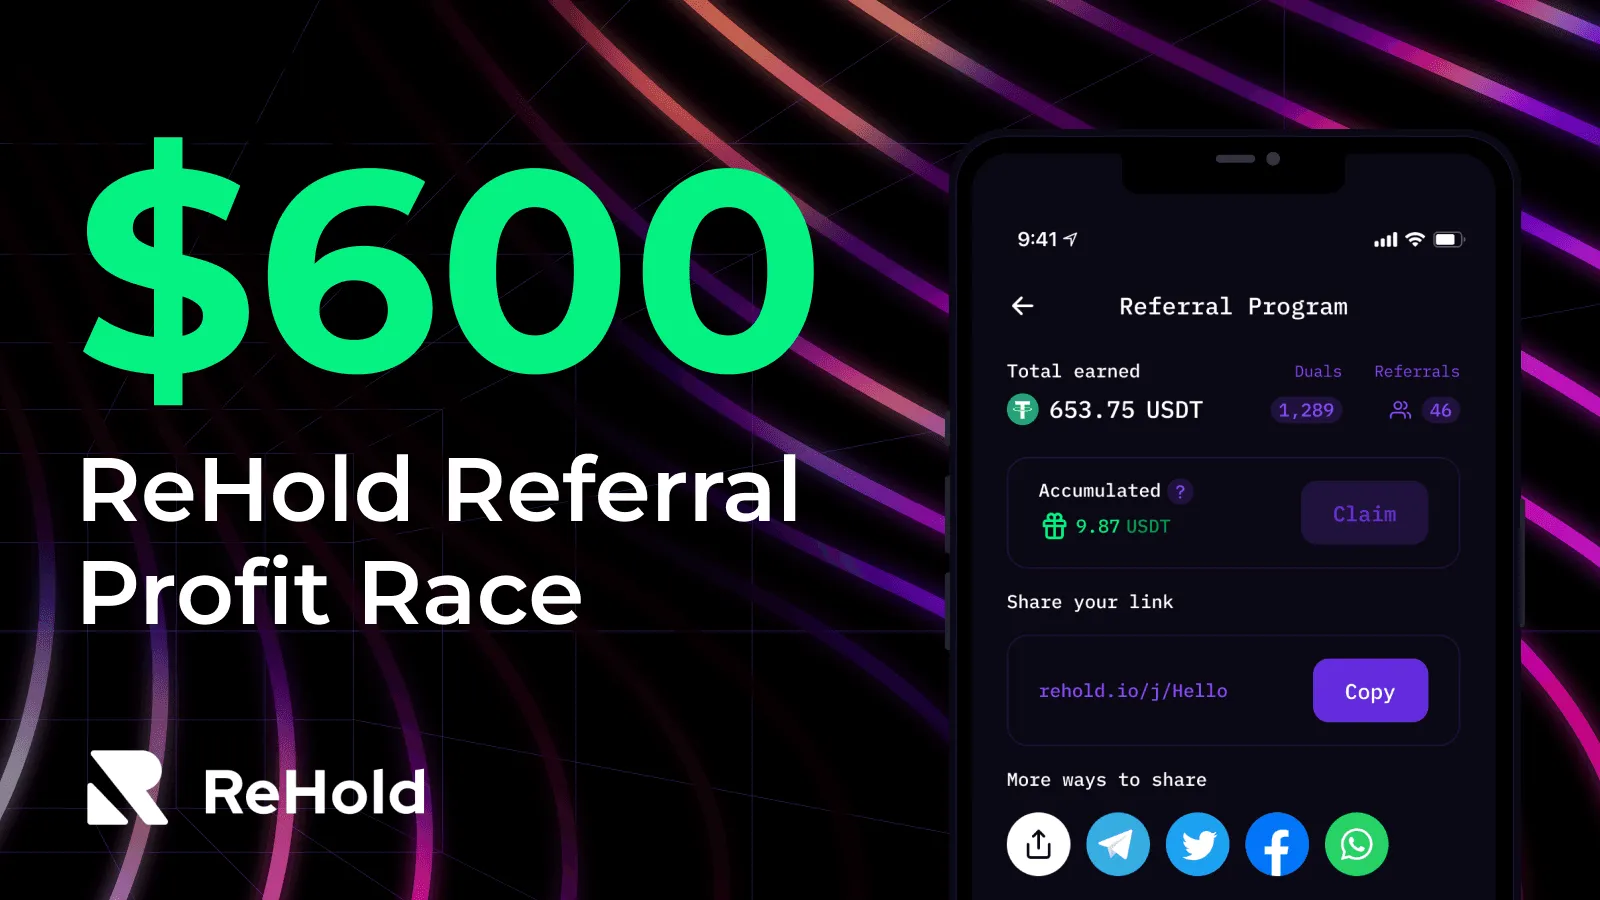 ReHold Referral Profit Race: Double Your Earnings & Win Prizes